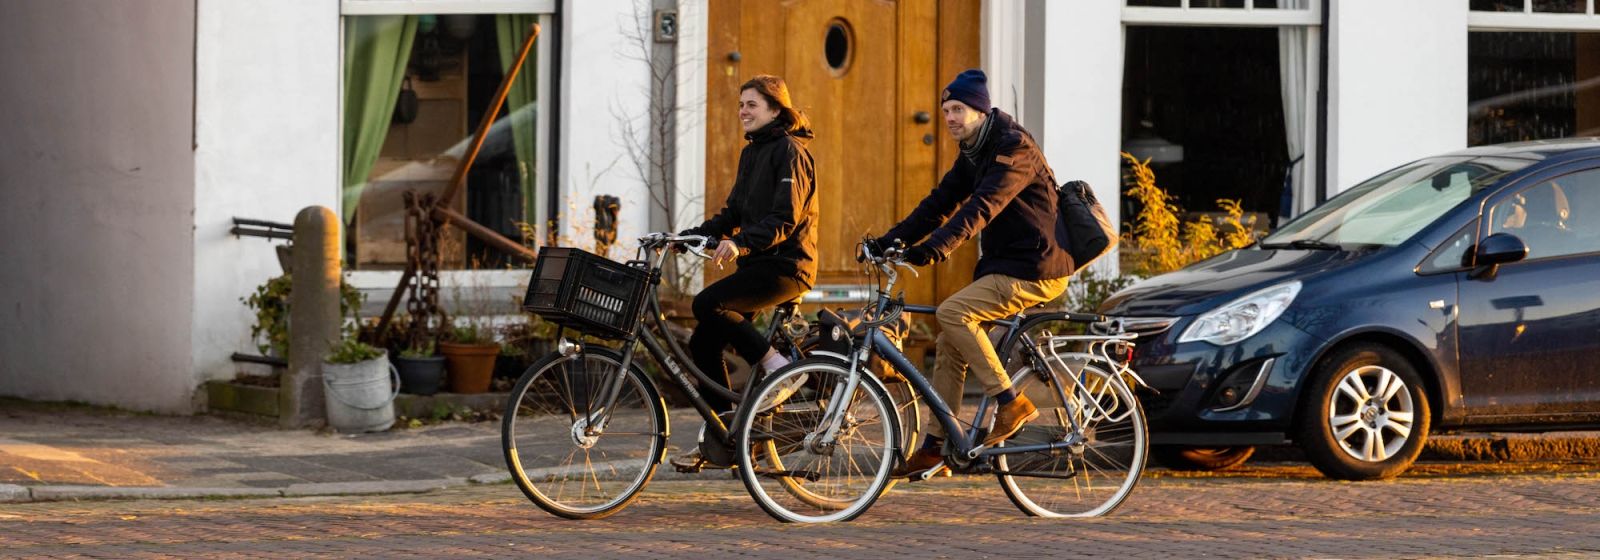 New shared bicycle system opening in Wageningen